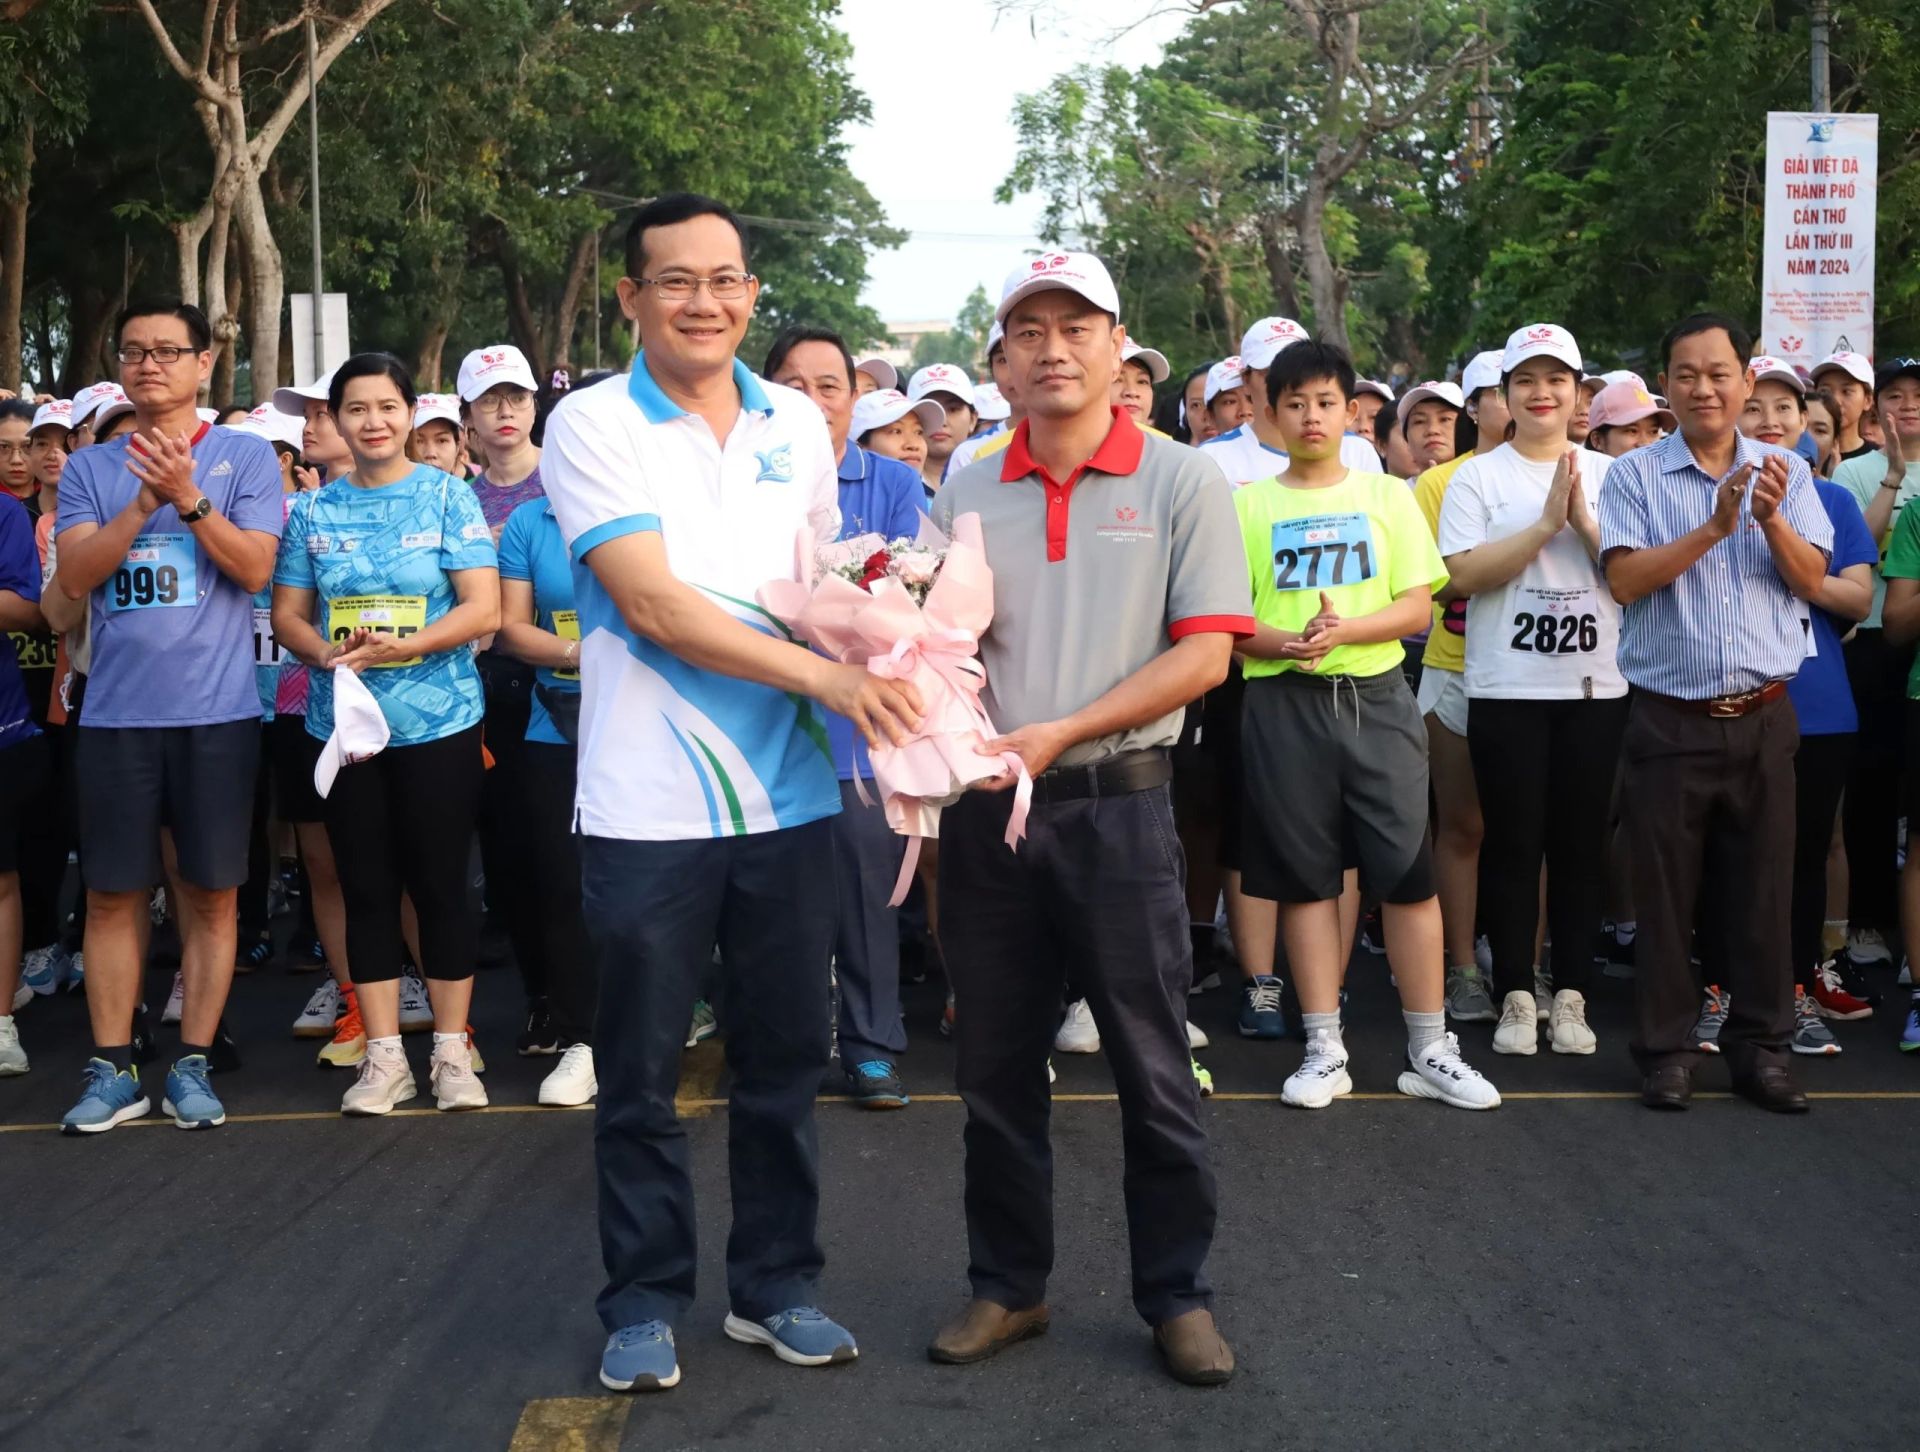 Mr Nguyen Minh Tuan - Director of the Department of Culture, Sports and Tourism of Can Tho City presents flowers to a representative of S.I.S Can Tho International General Hospital, the unit that co-sponsored the tournament